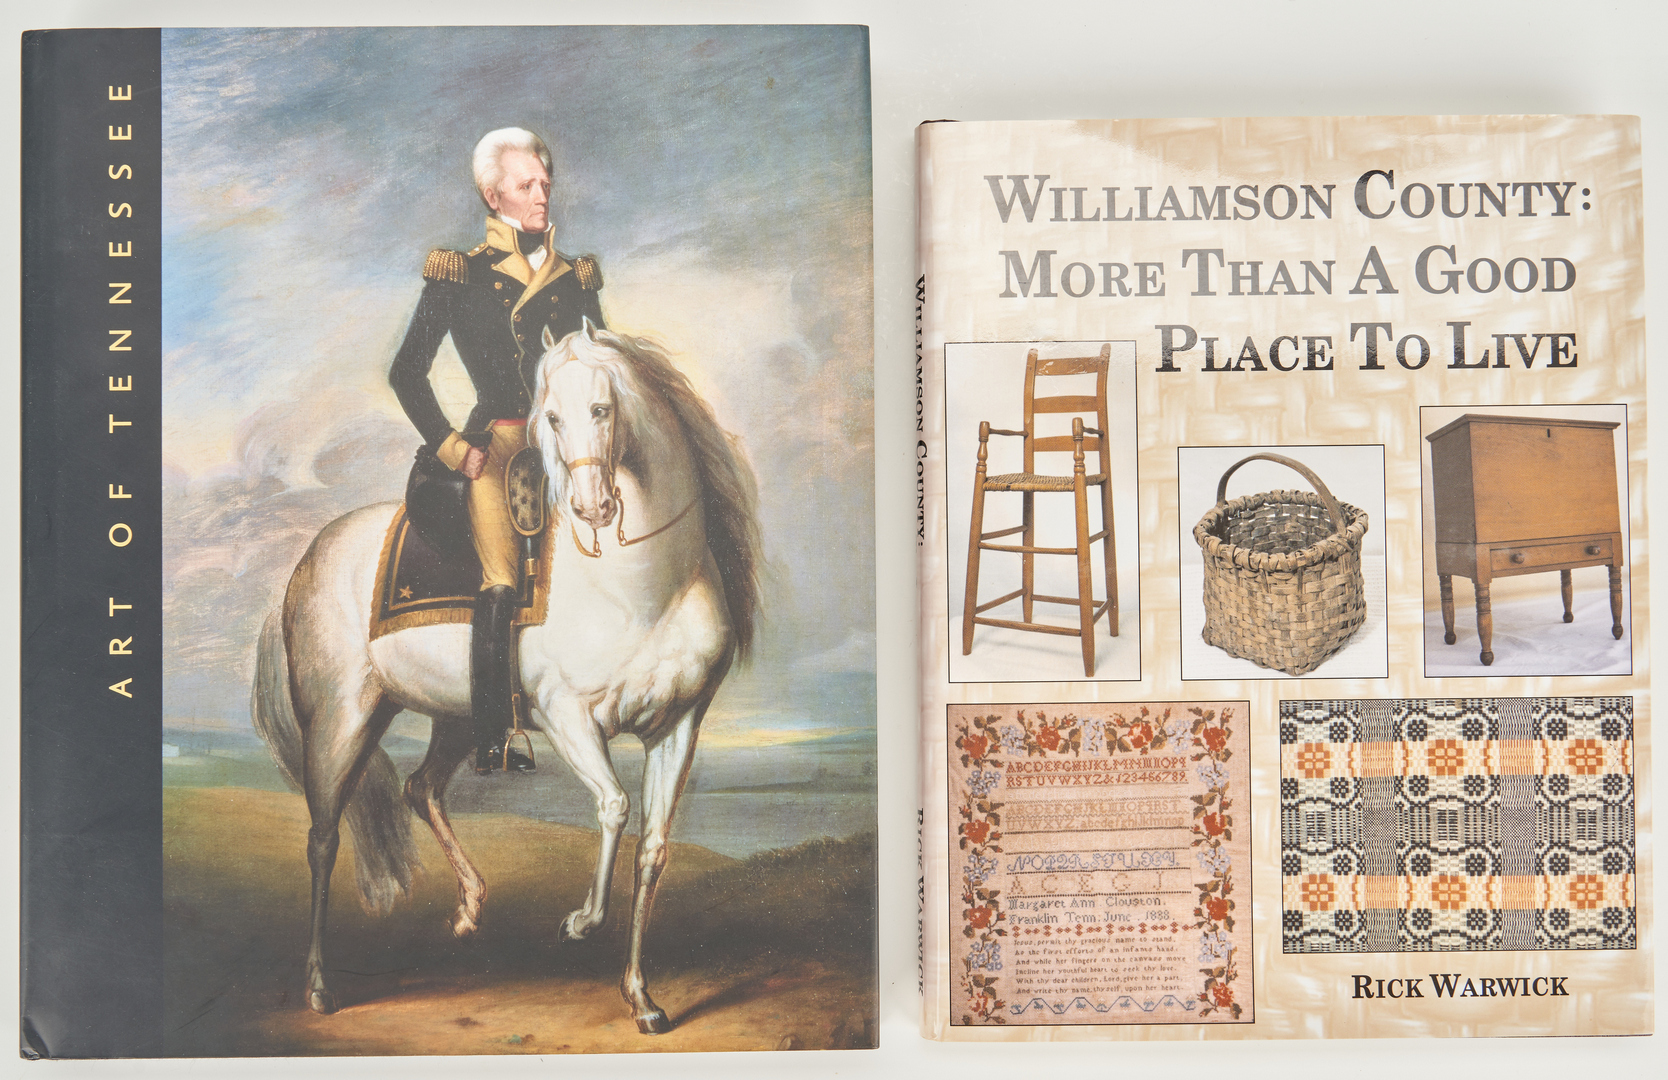 Lot 649: 12 TN, KY, OH Art and Antique Books